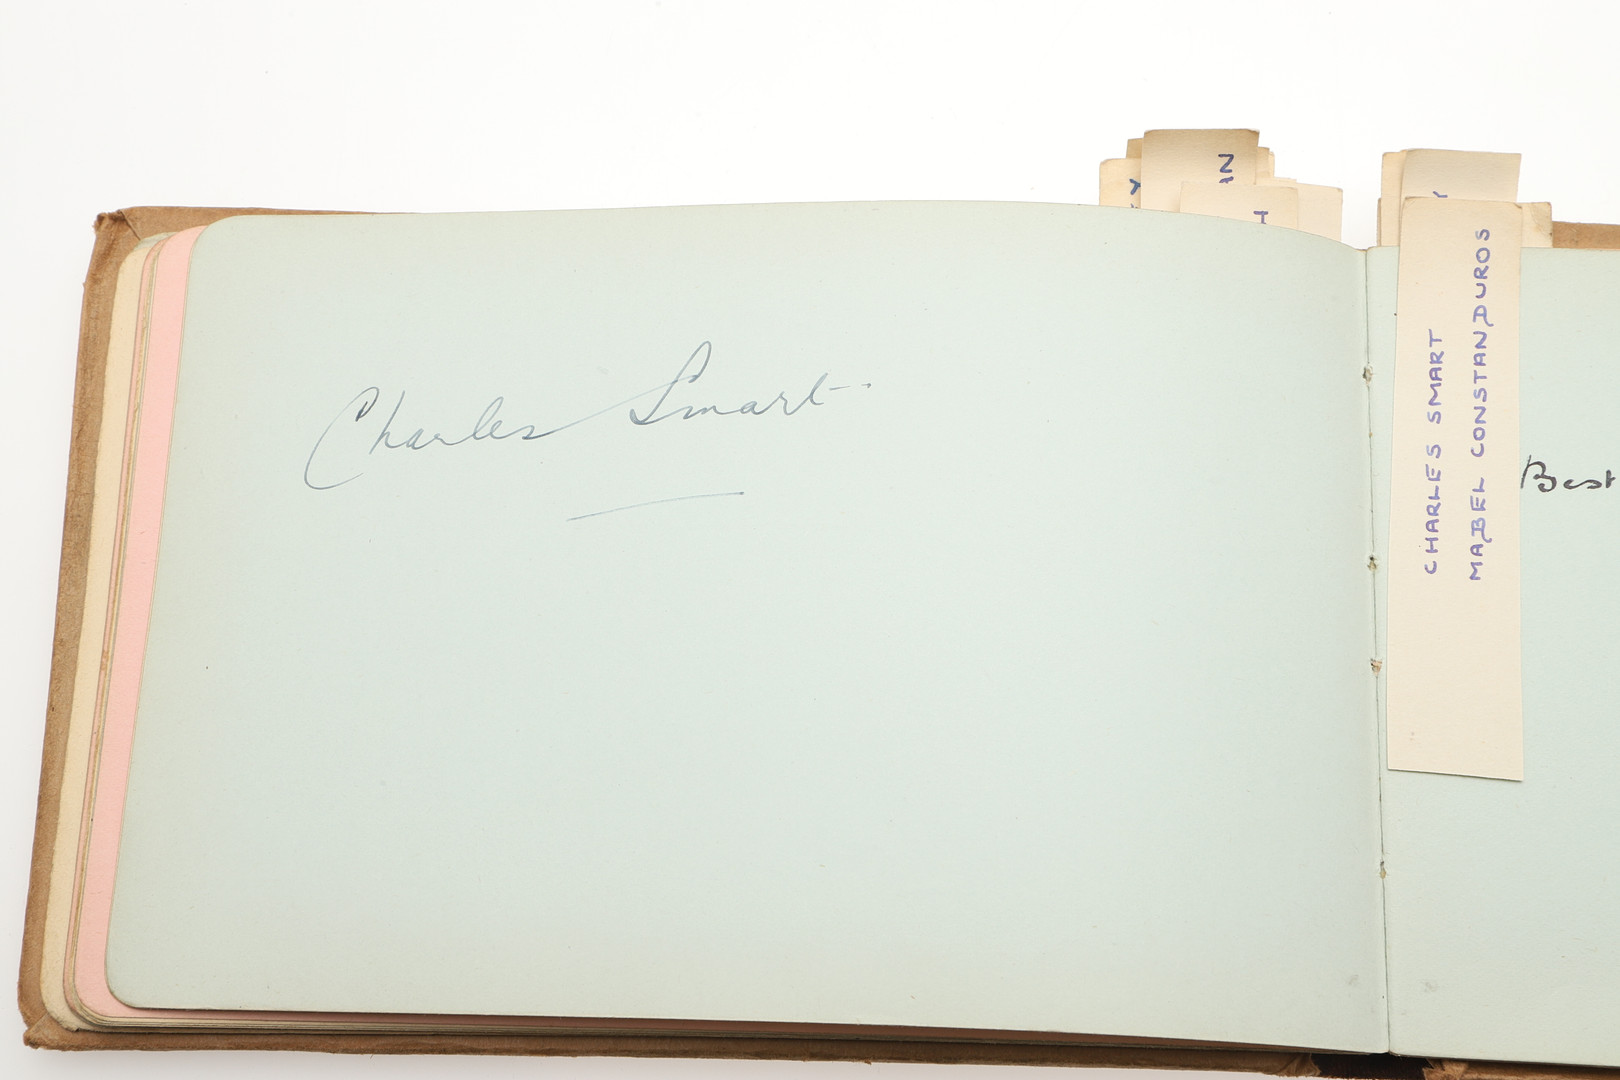 LARGE AUTOGRAPH COLLECTION - WINSTON CHURCHILL & OTHER AUTOGRAPHS. - Image 25 of 63